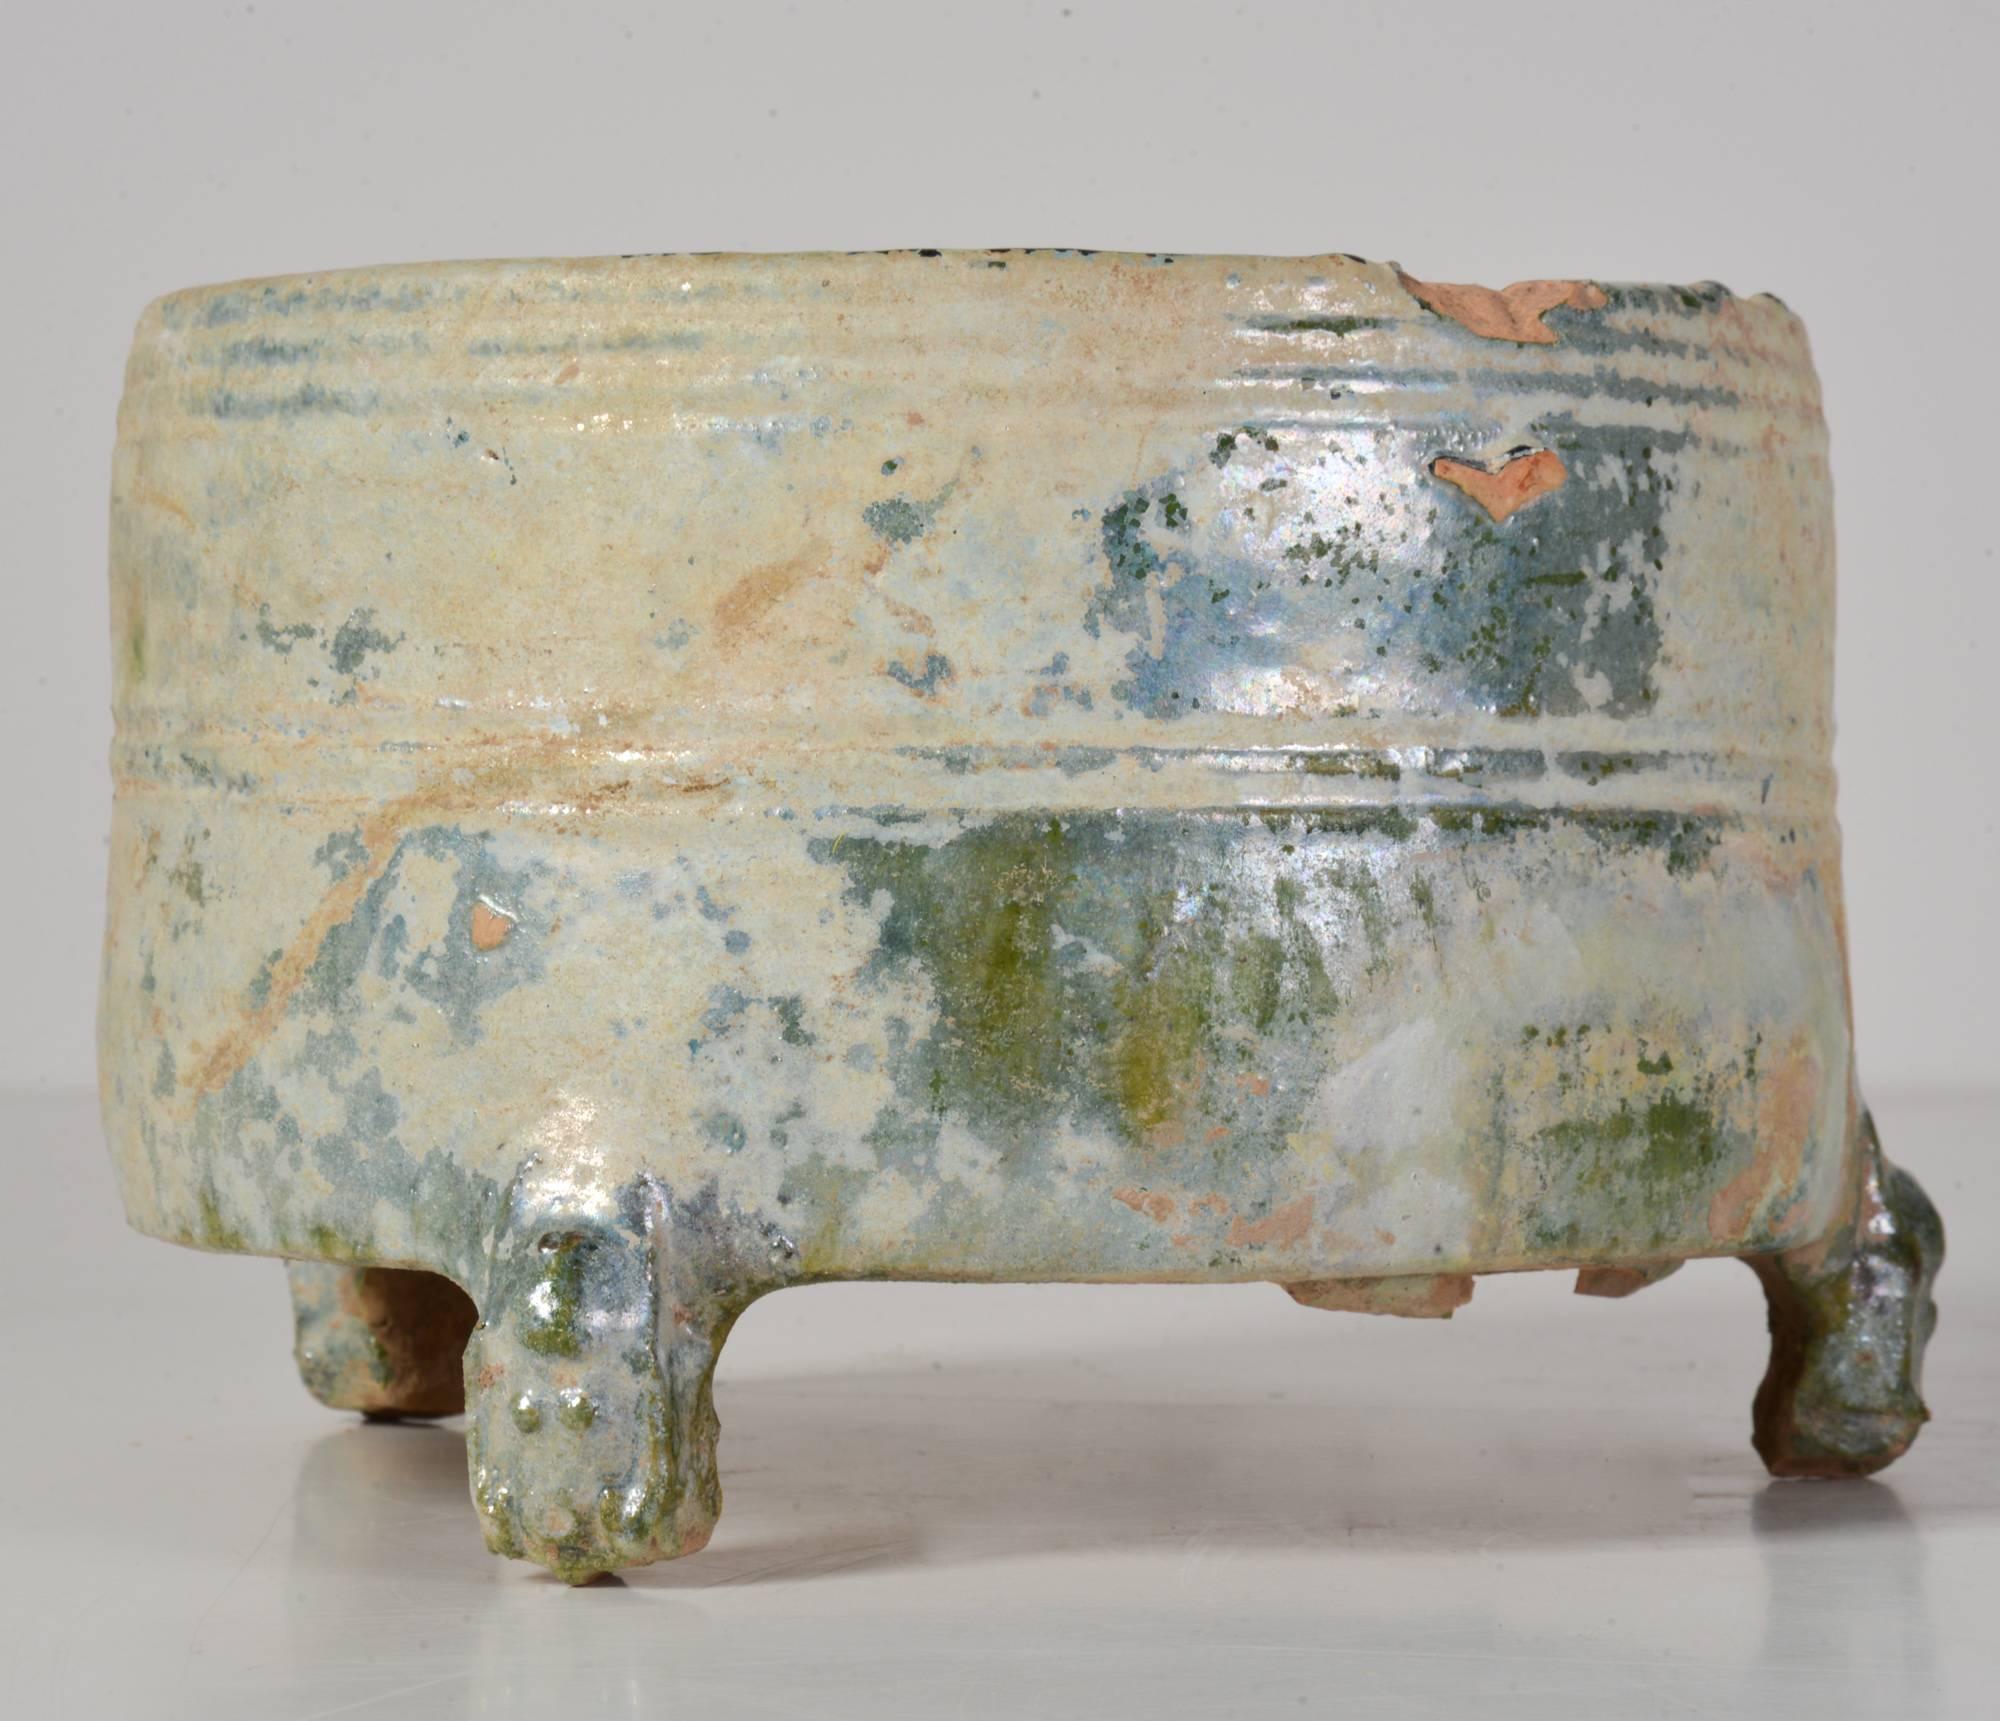 A wonderful Han dynasty (206 BC-200 AD) incense burner. The circular body set upon three bear shaped legs and is covered in heavy leaded green glaze. The body is shaped with bands of incised rings. The glaze has degraded from centuries of burial,